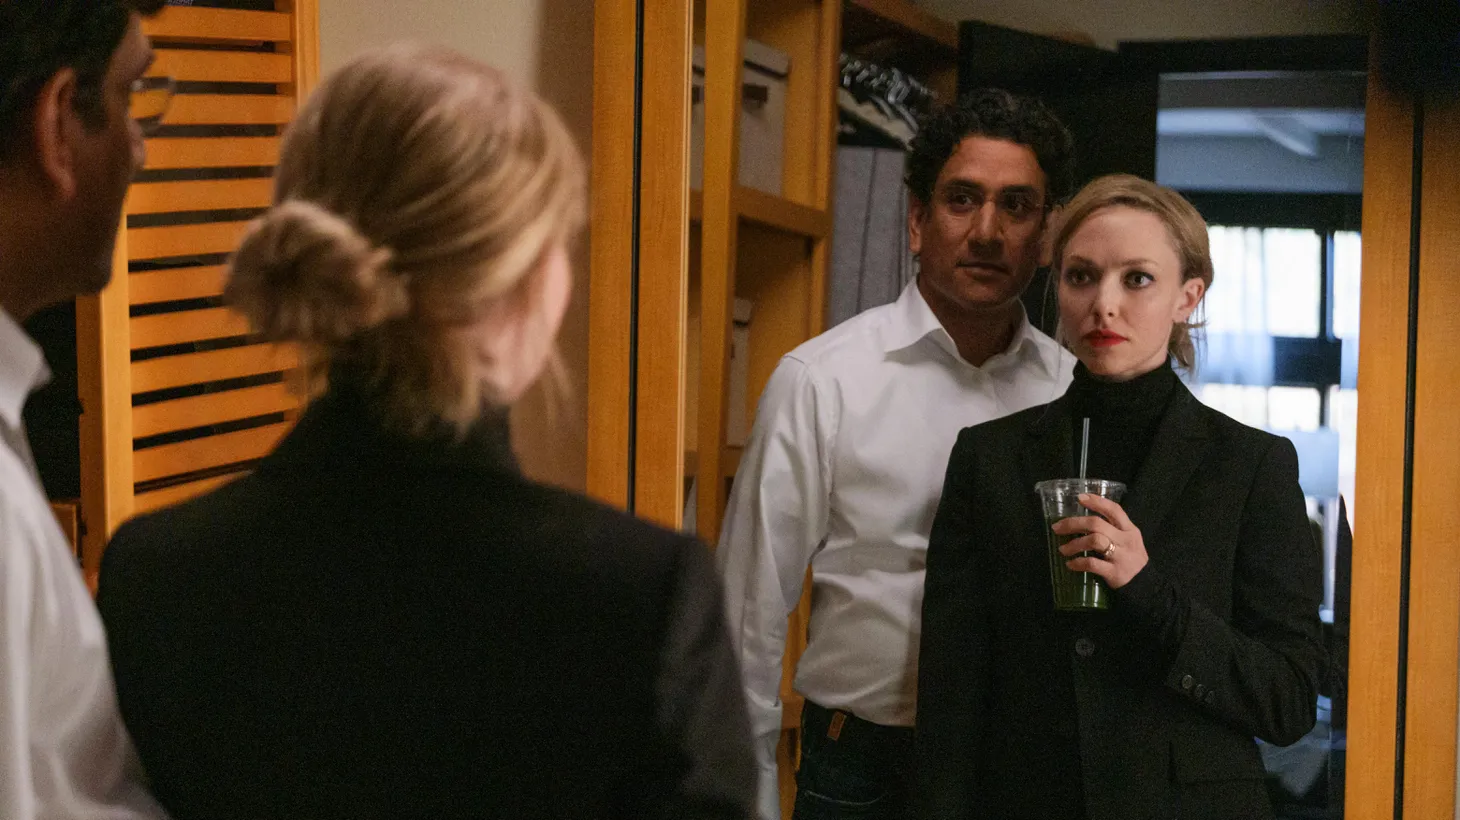 Hulu’s limited series “The Dropout” tells the story of Elizabeth Holmes and the downfall of her blood testing startup, Theranos. Amanda Seyfried plays Holmes, and her partner Sunny Balwani is played by Naveen Andrews.